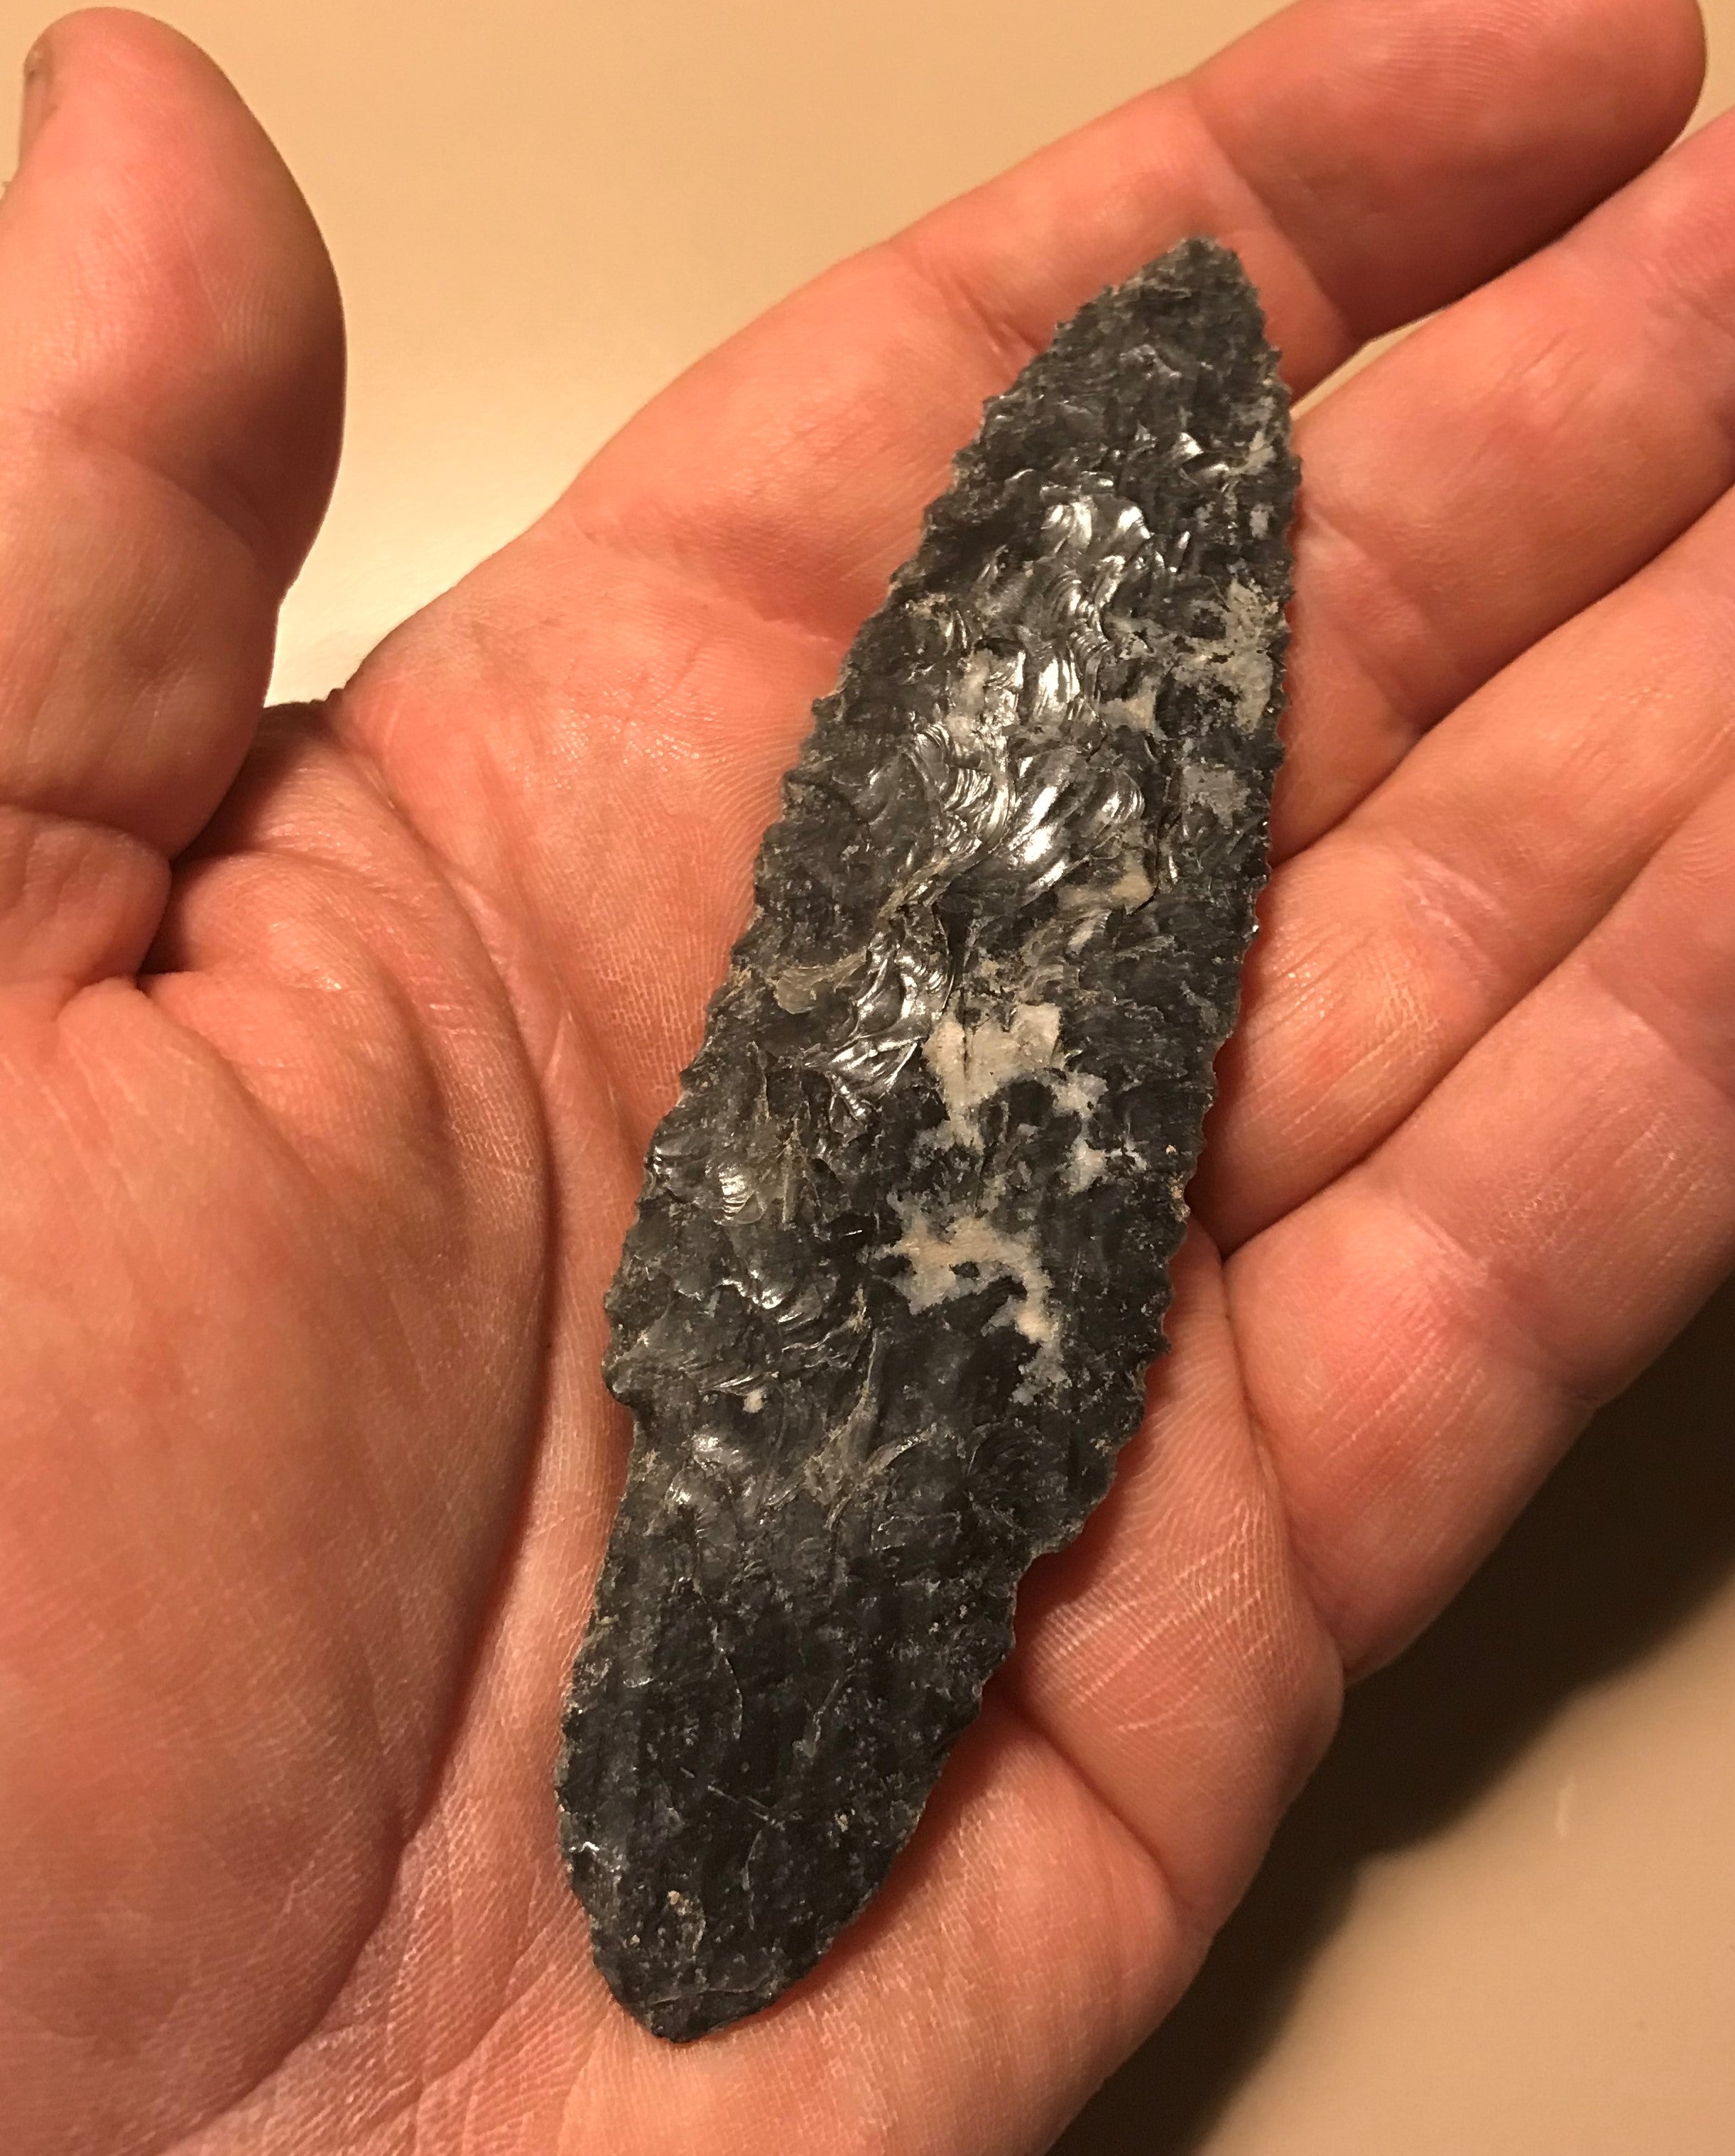 Western Stemmed projectile point